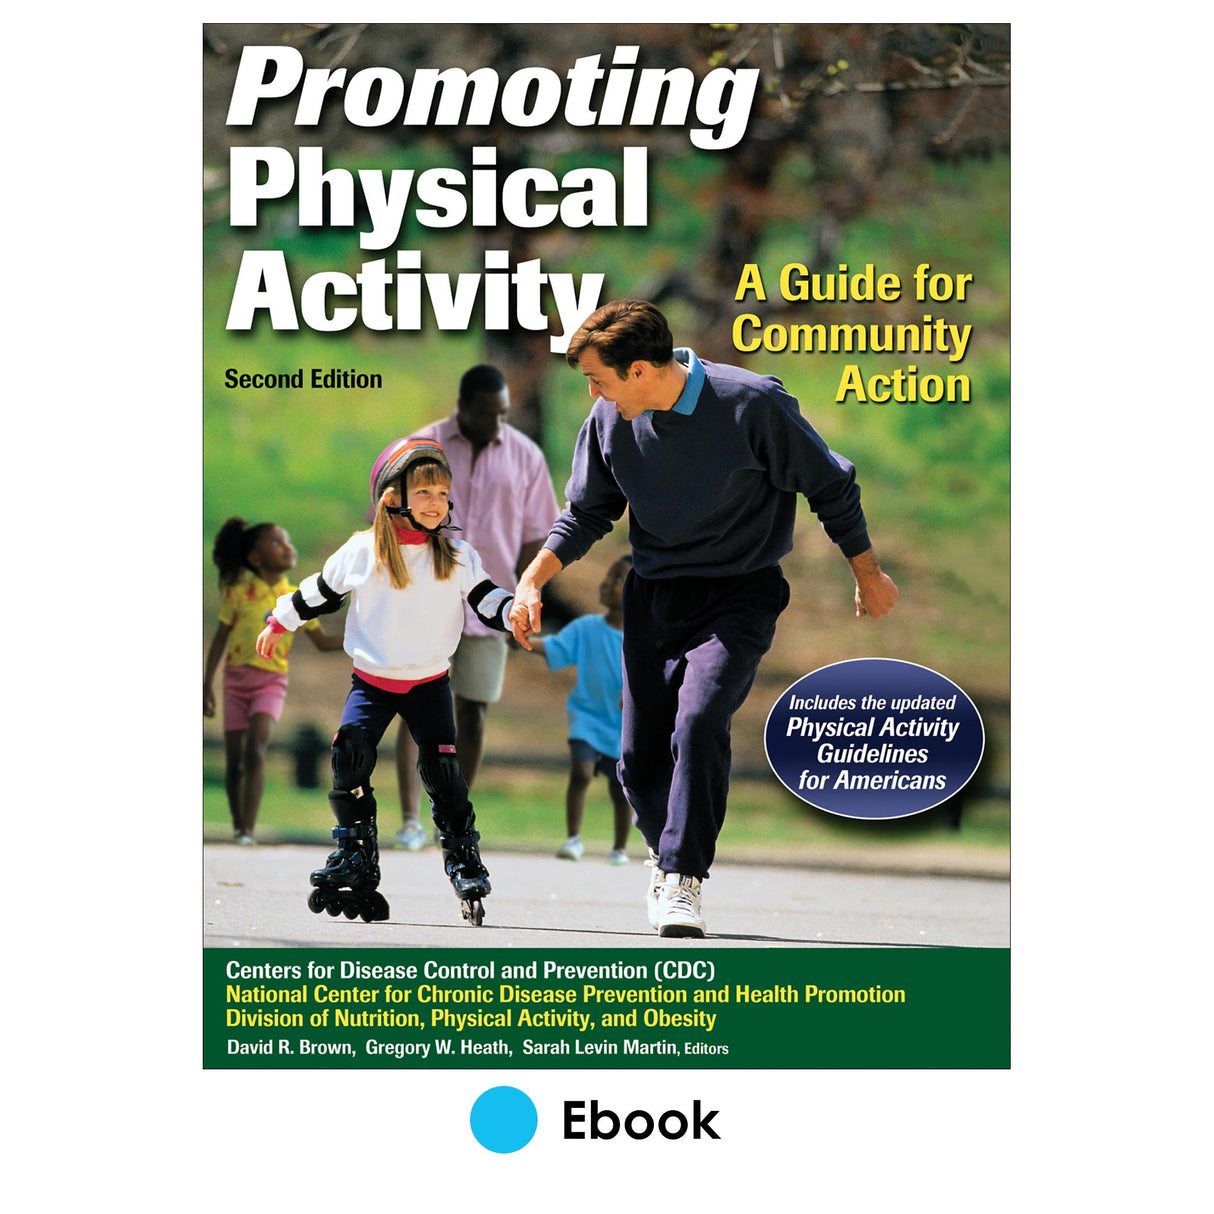 Promoting Physical Activity 2nd Edition PDF